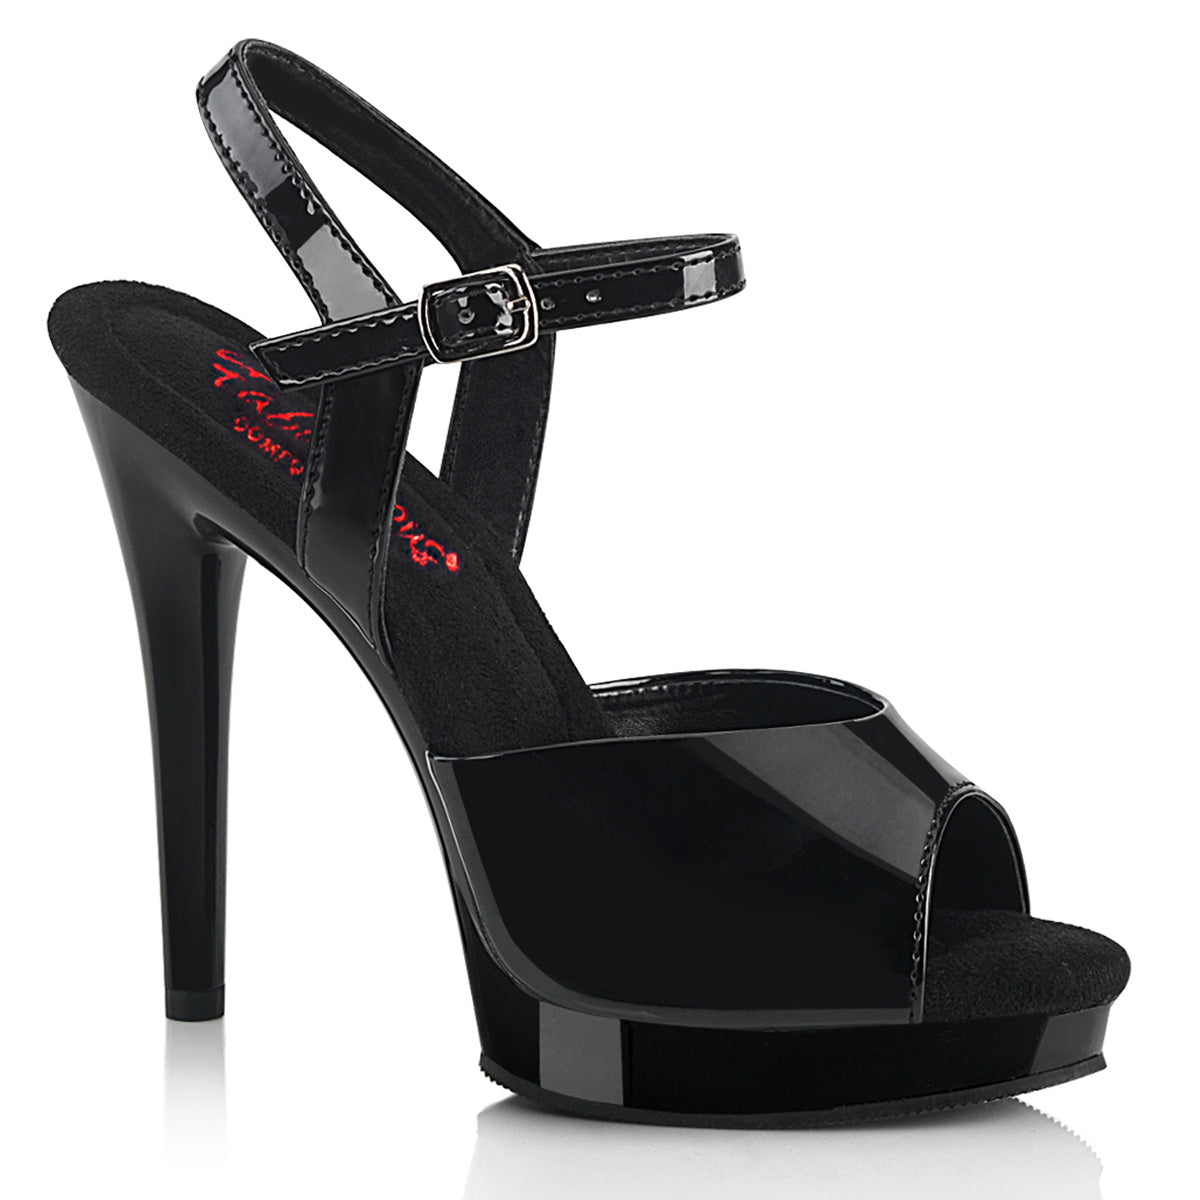 GLORY-509 Black Patent Bedroom Heels Fabulicious Shoes – Pole Dancing ...